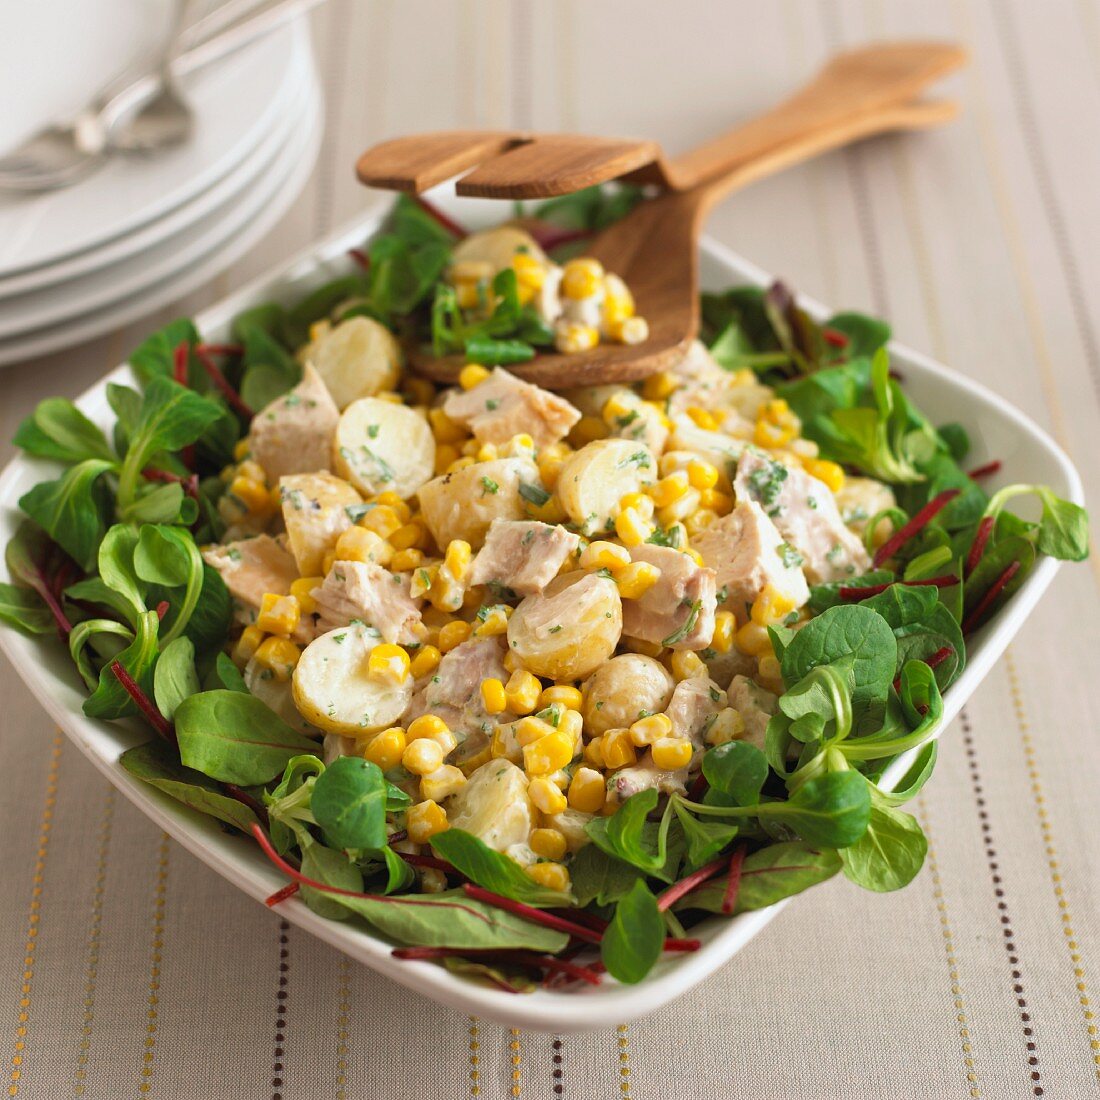 Potato salad with chicken, sweetcorn and lamb's lettuce